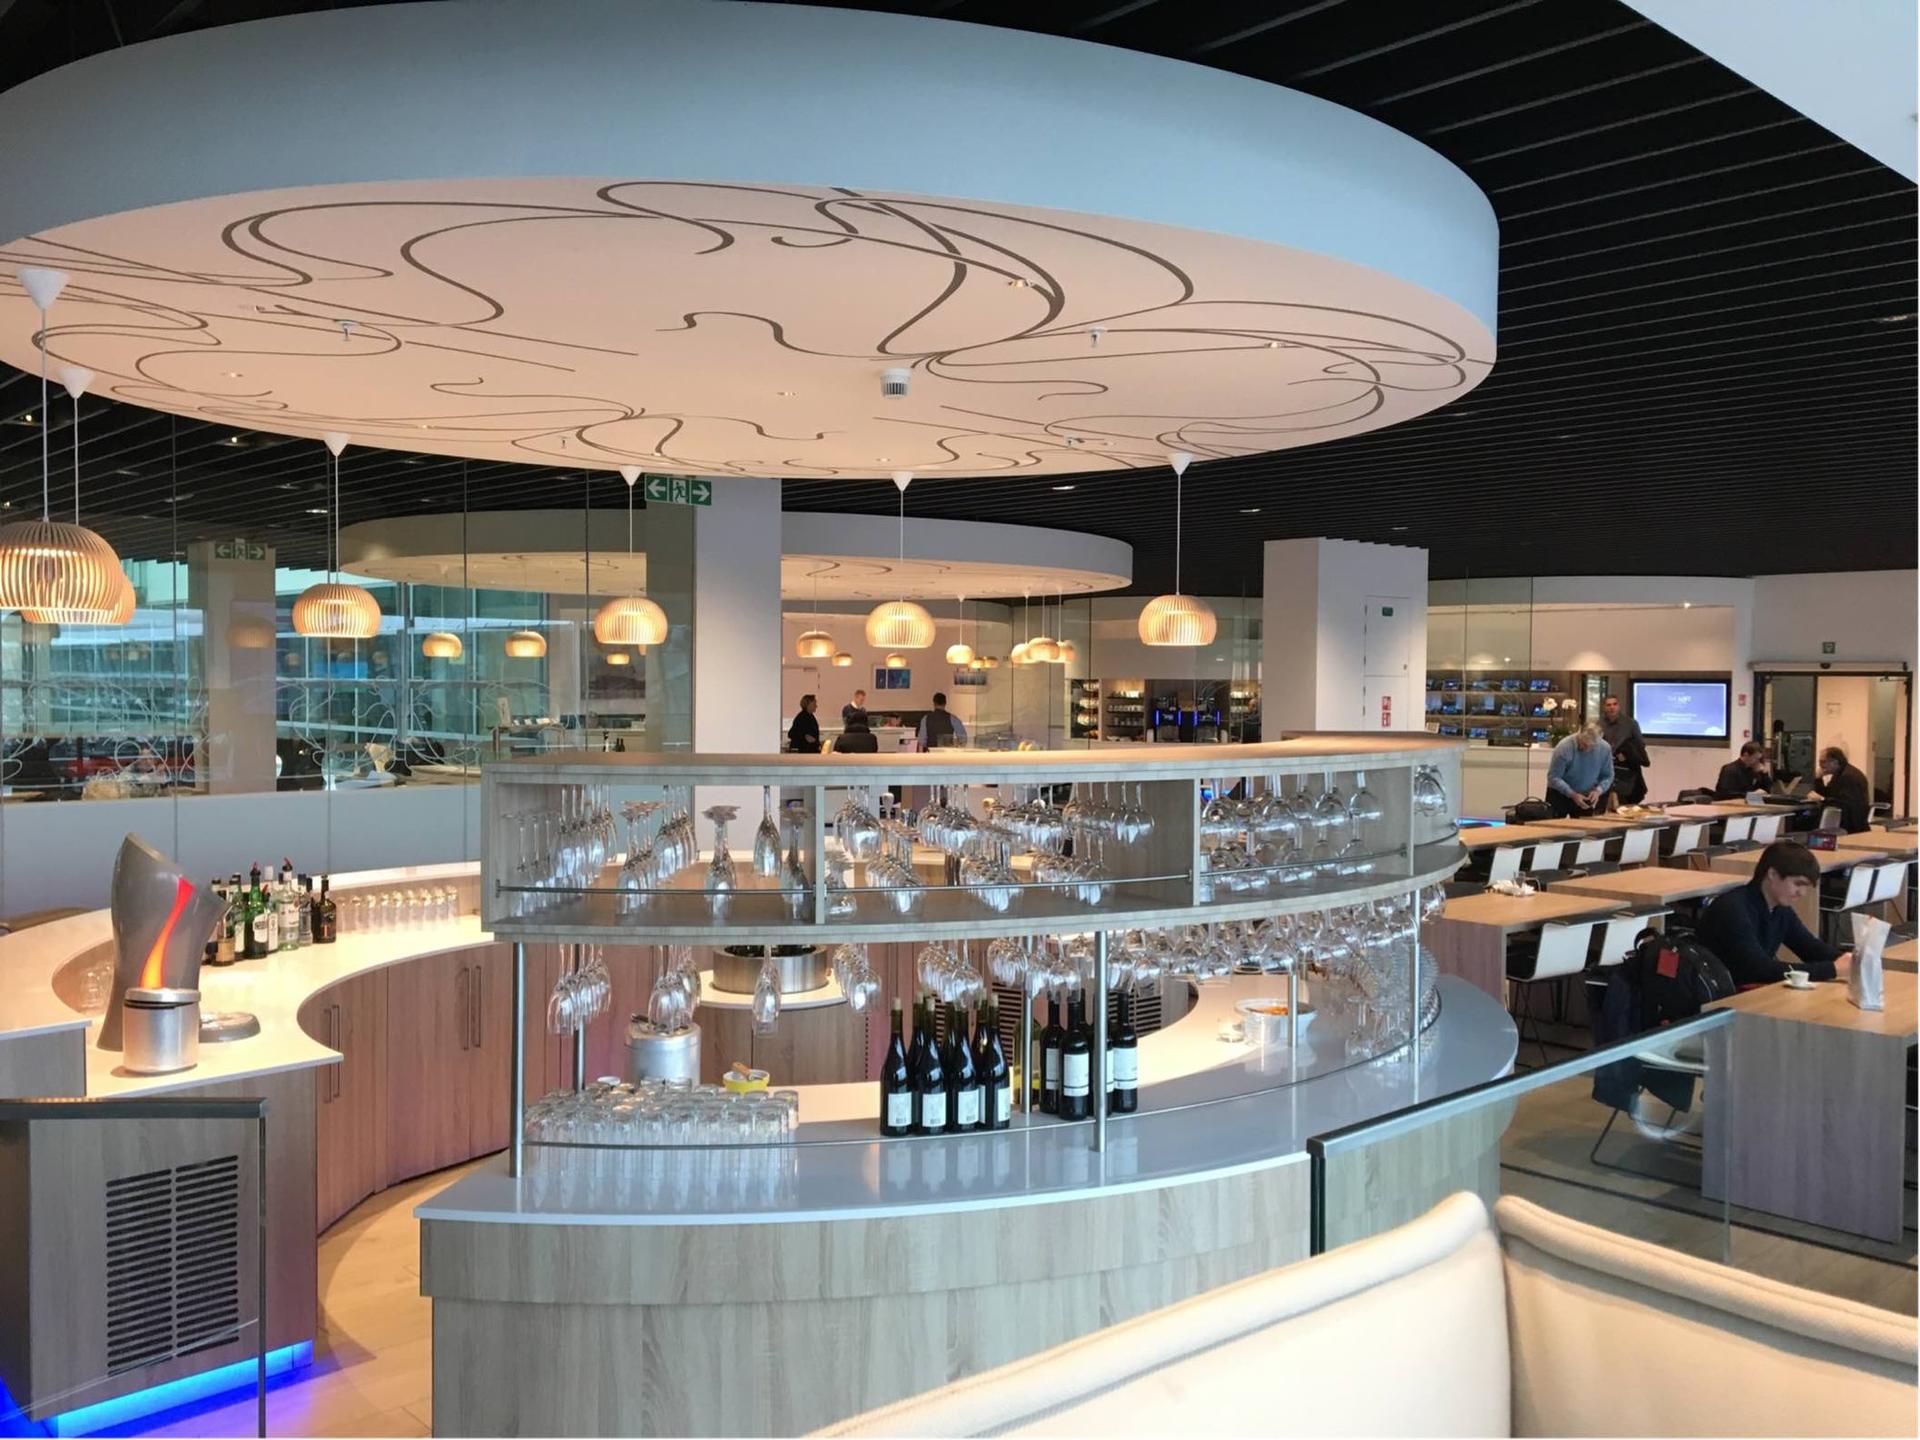 The Loft by Brussels Airlines and Lounge by Lexus image 9 of 23